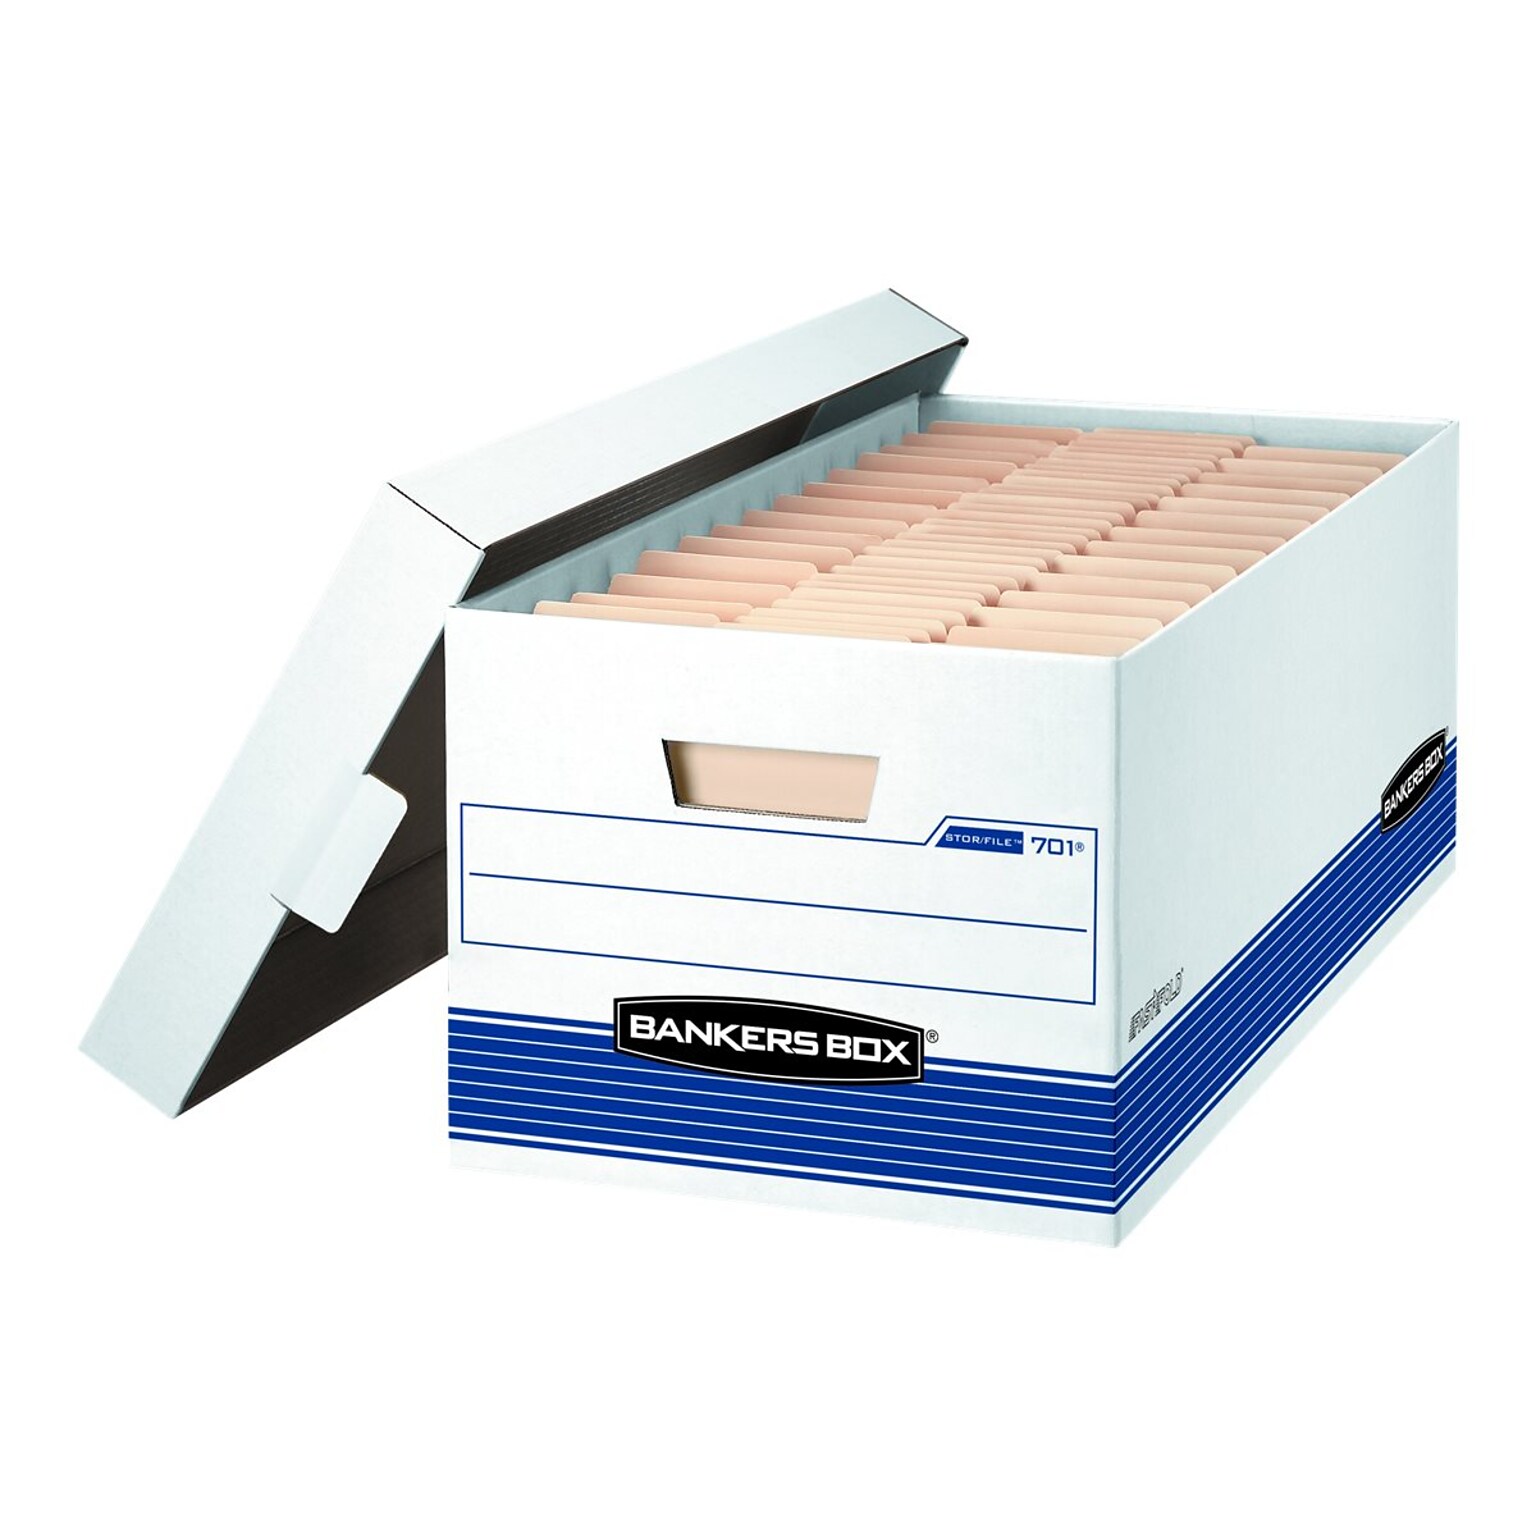 Bankers Box Medium-Duty Corrugated File Storage Boxes, Lift-Off Lid, Letter Size, White/Blue, 20/Carton (0070110)